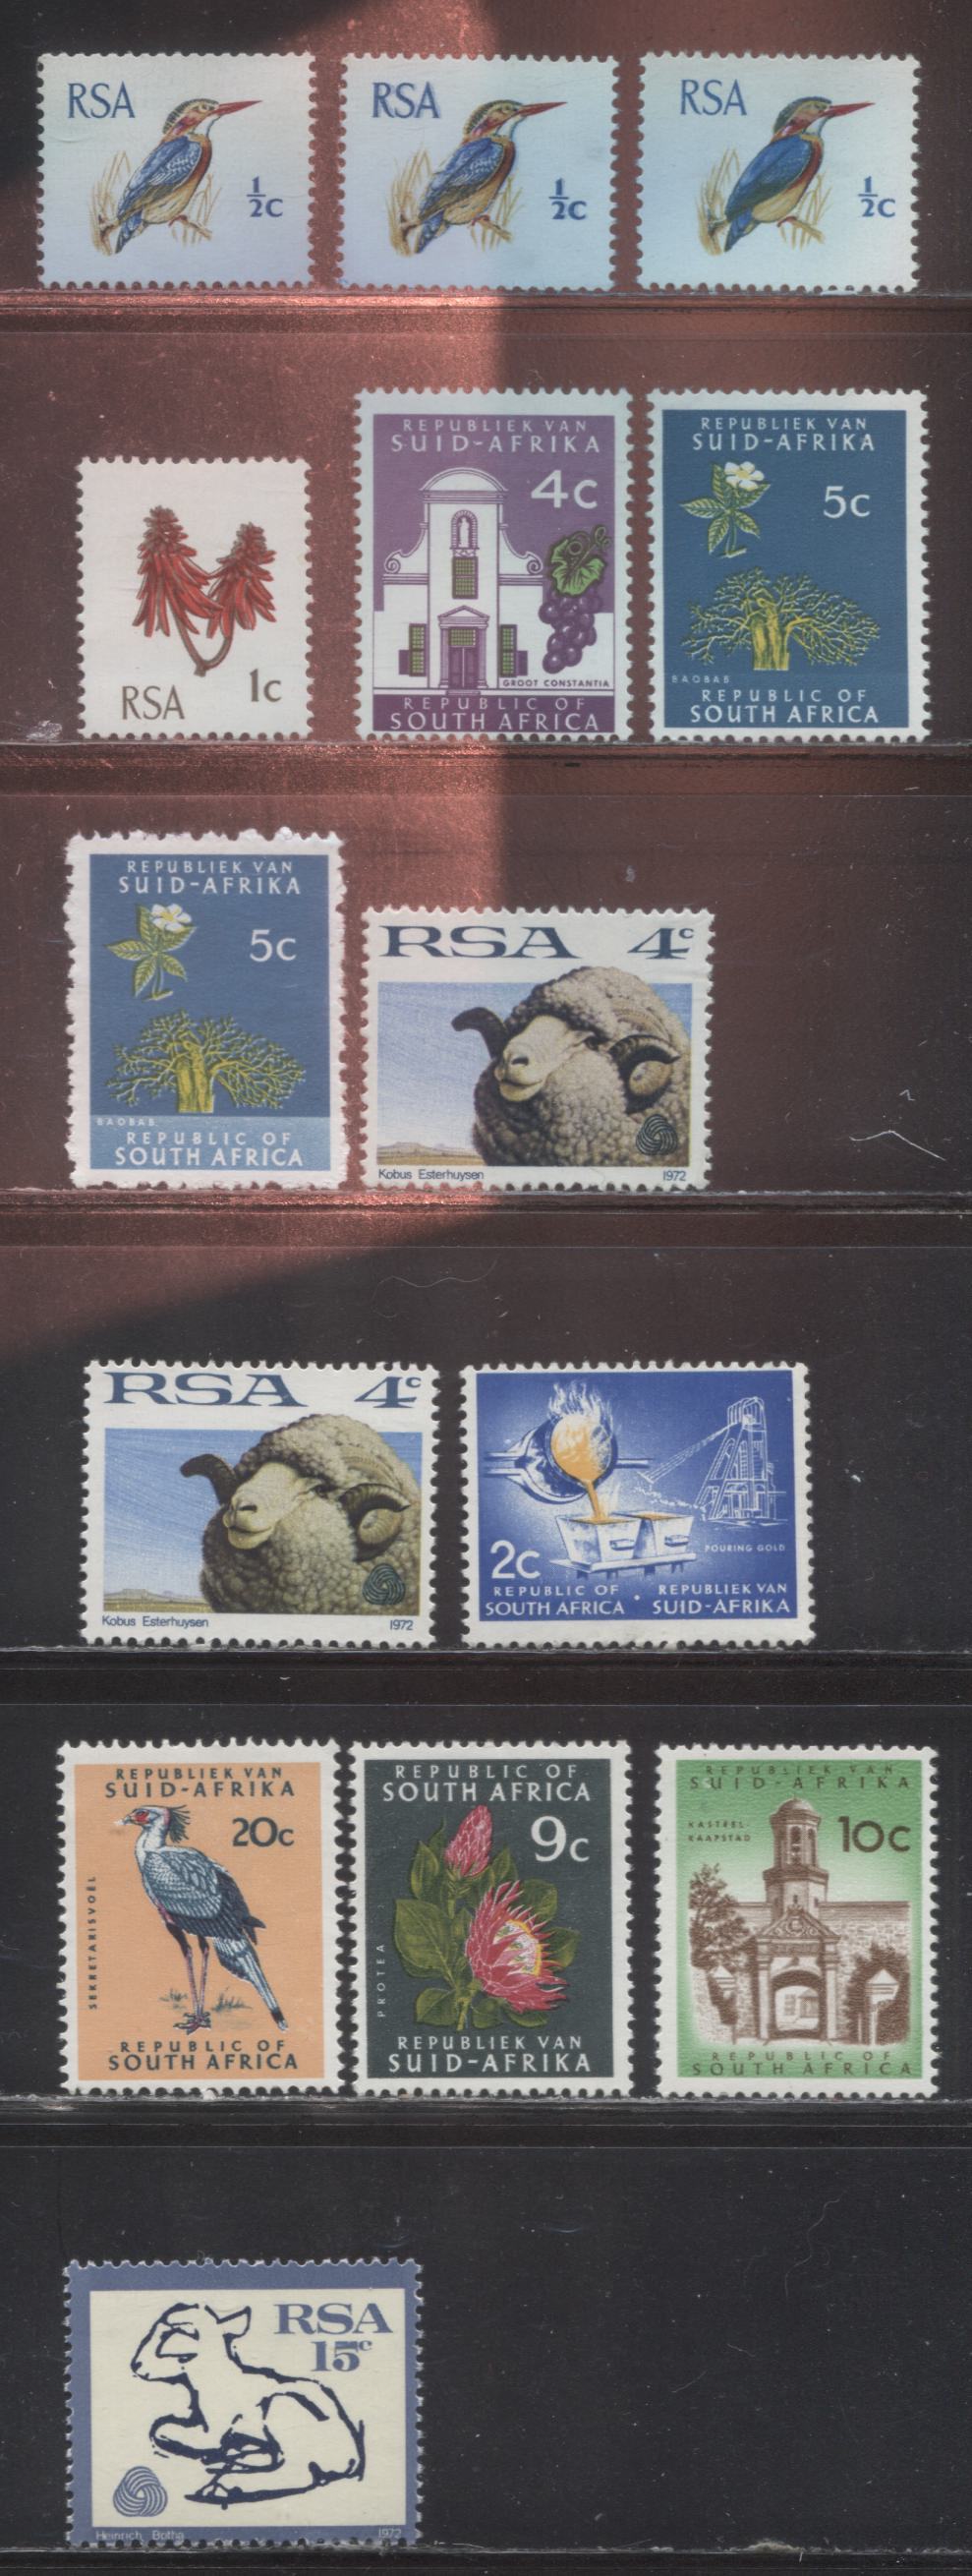 Lot 323 South Africa SG#B238/B251, 276-277 1/2c - 20c 1969-1971 Pictorial Definitive Issue, Re-Drawn Designs, Watermarked Tete-Beche RSA in Triangles on Phosphorized Paper, A Fine NH and VFNH Partially Complete Set, Including Some Additional Shades